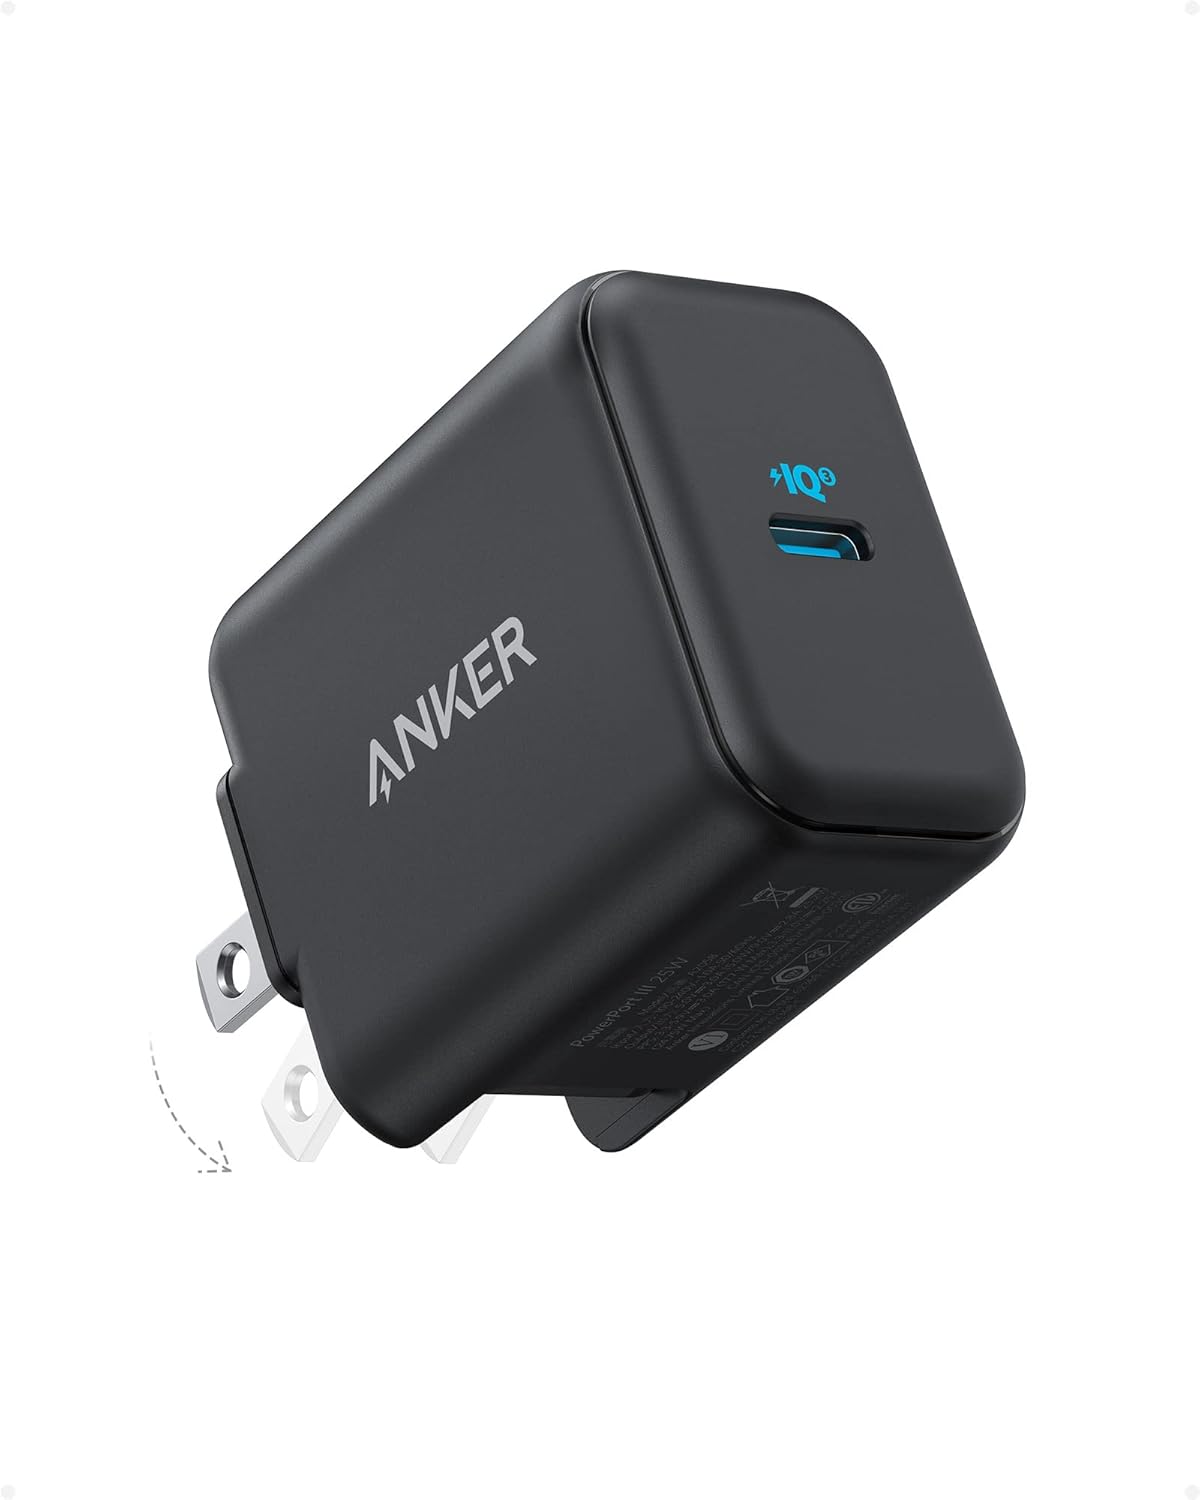 ANKER 312 Charger (25W) USB C Super Fast Charger